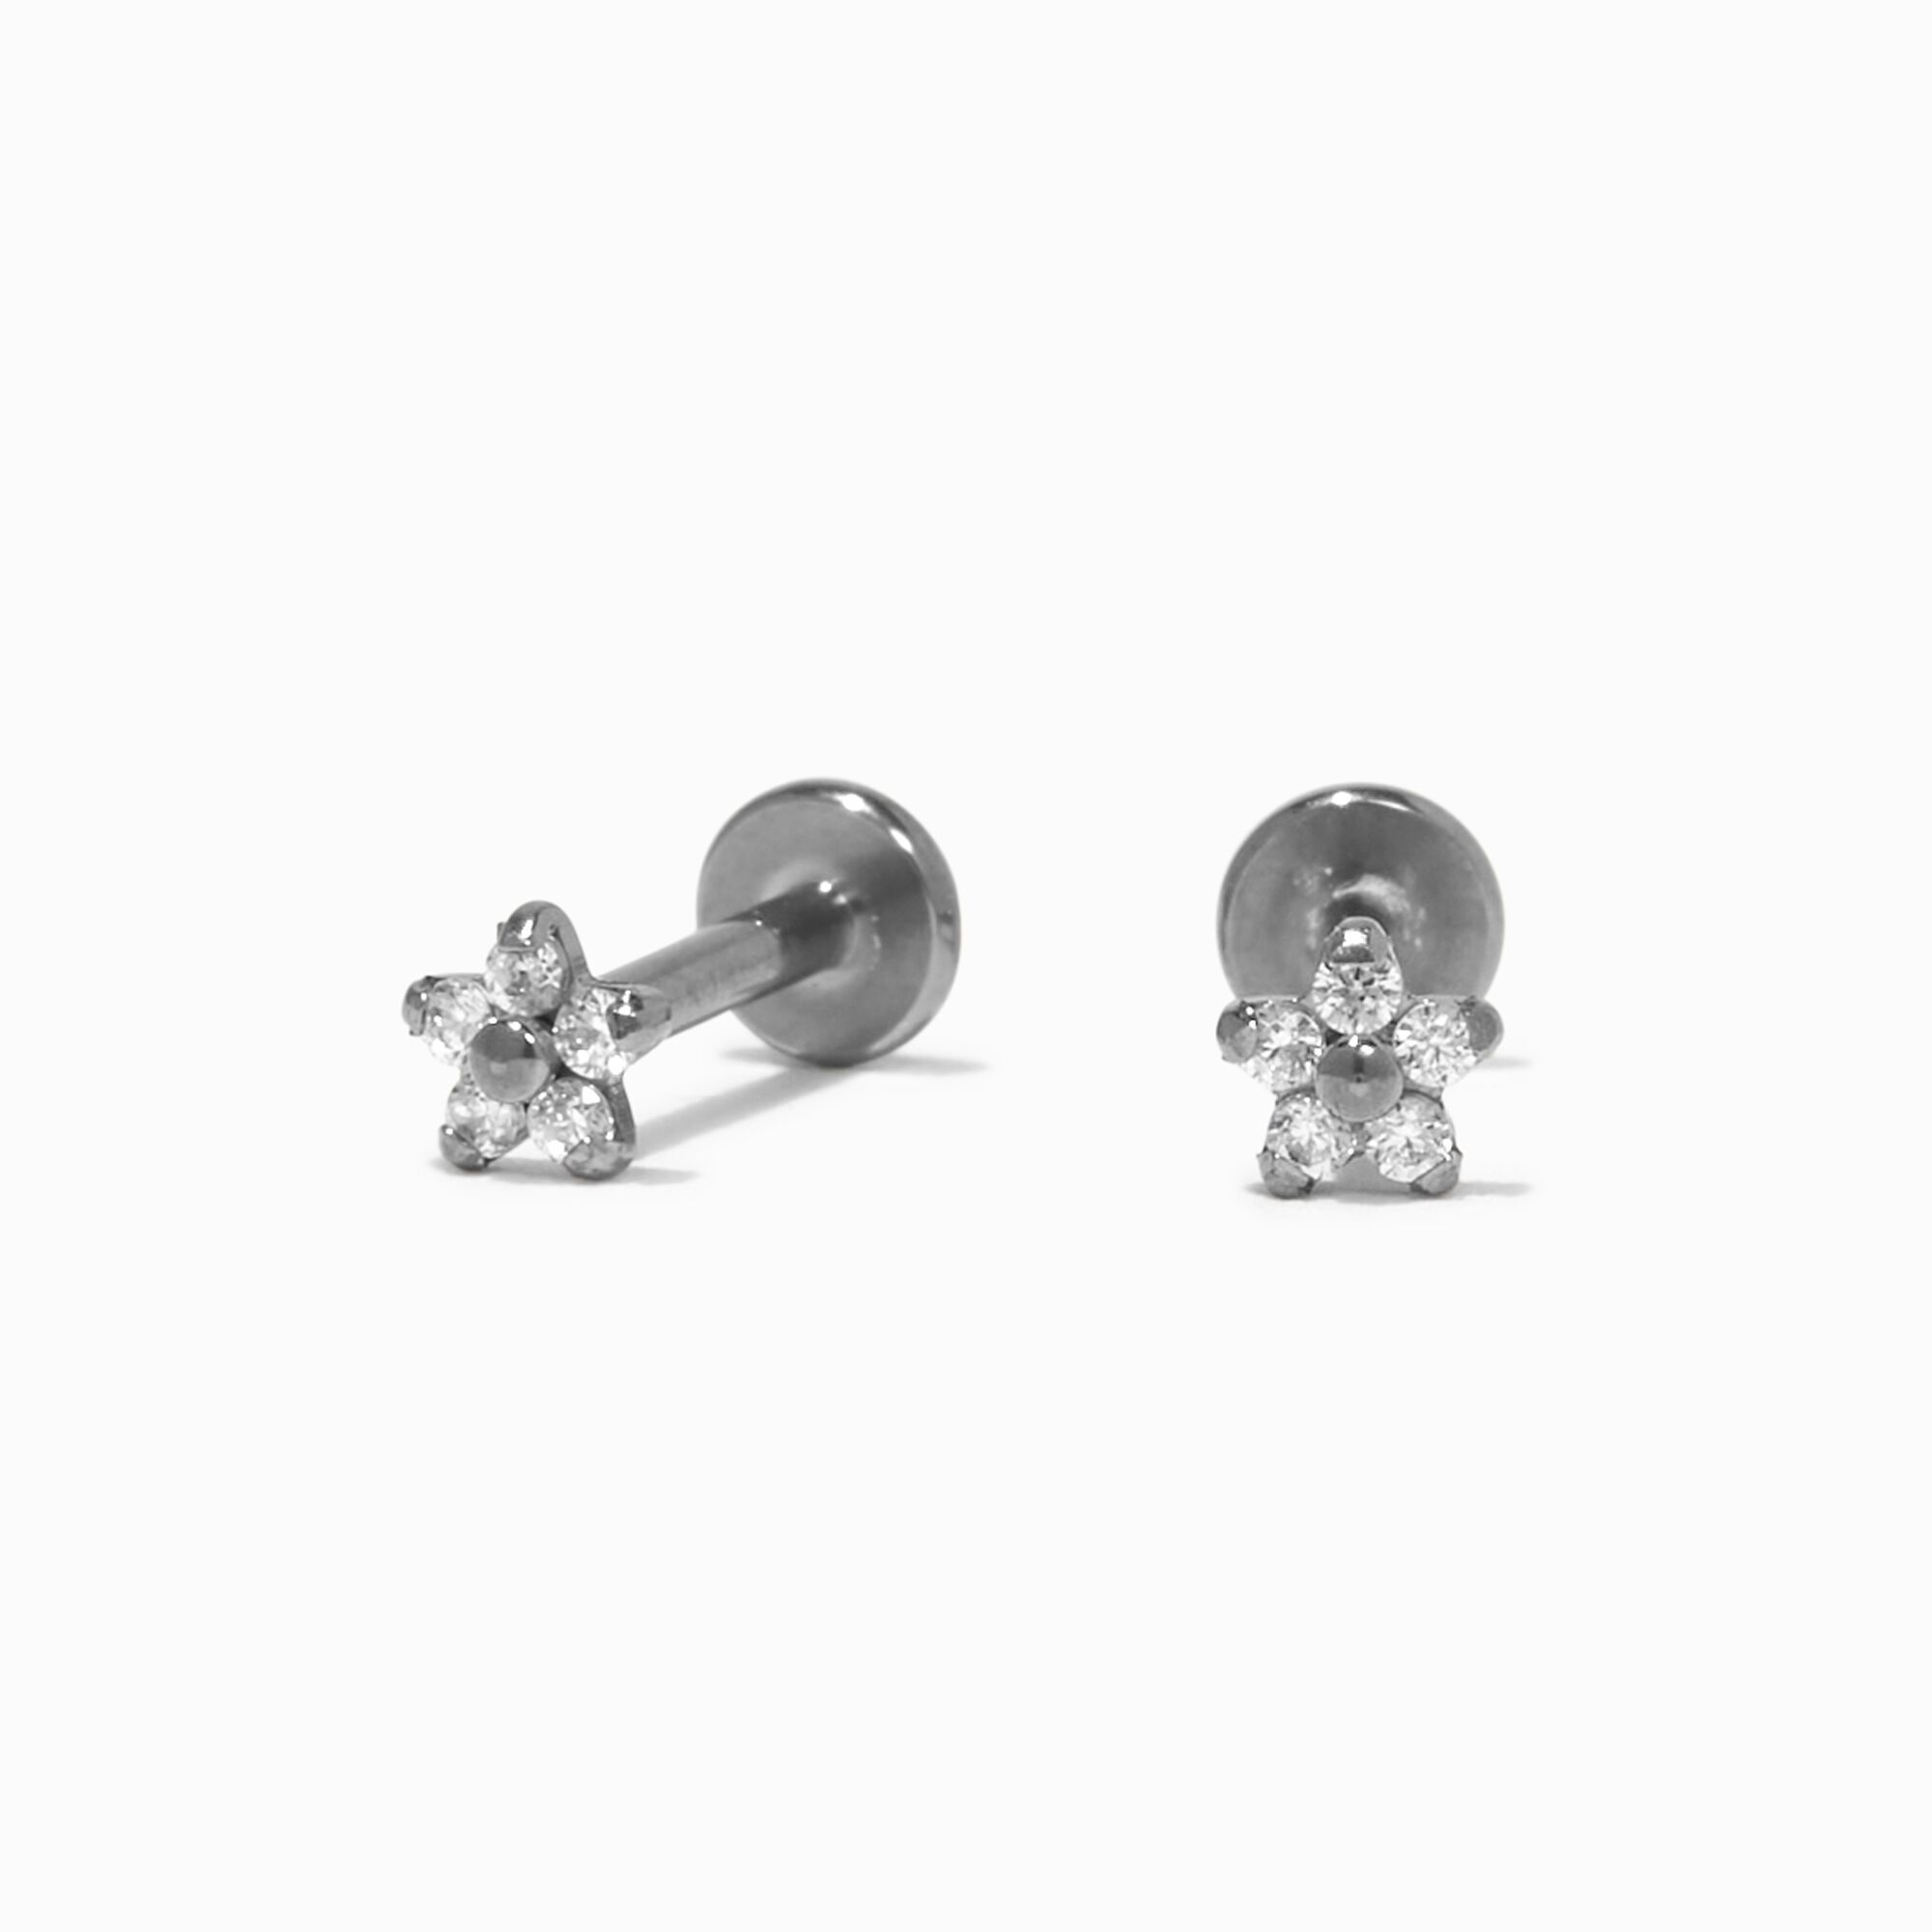 Claire's Women's Silver Multi Crystal Changeable Tragus Flat Back Earrings, 5 Pack, 52744, Adult Unisex, Size: Small